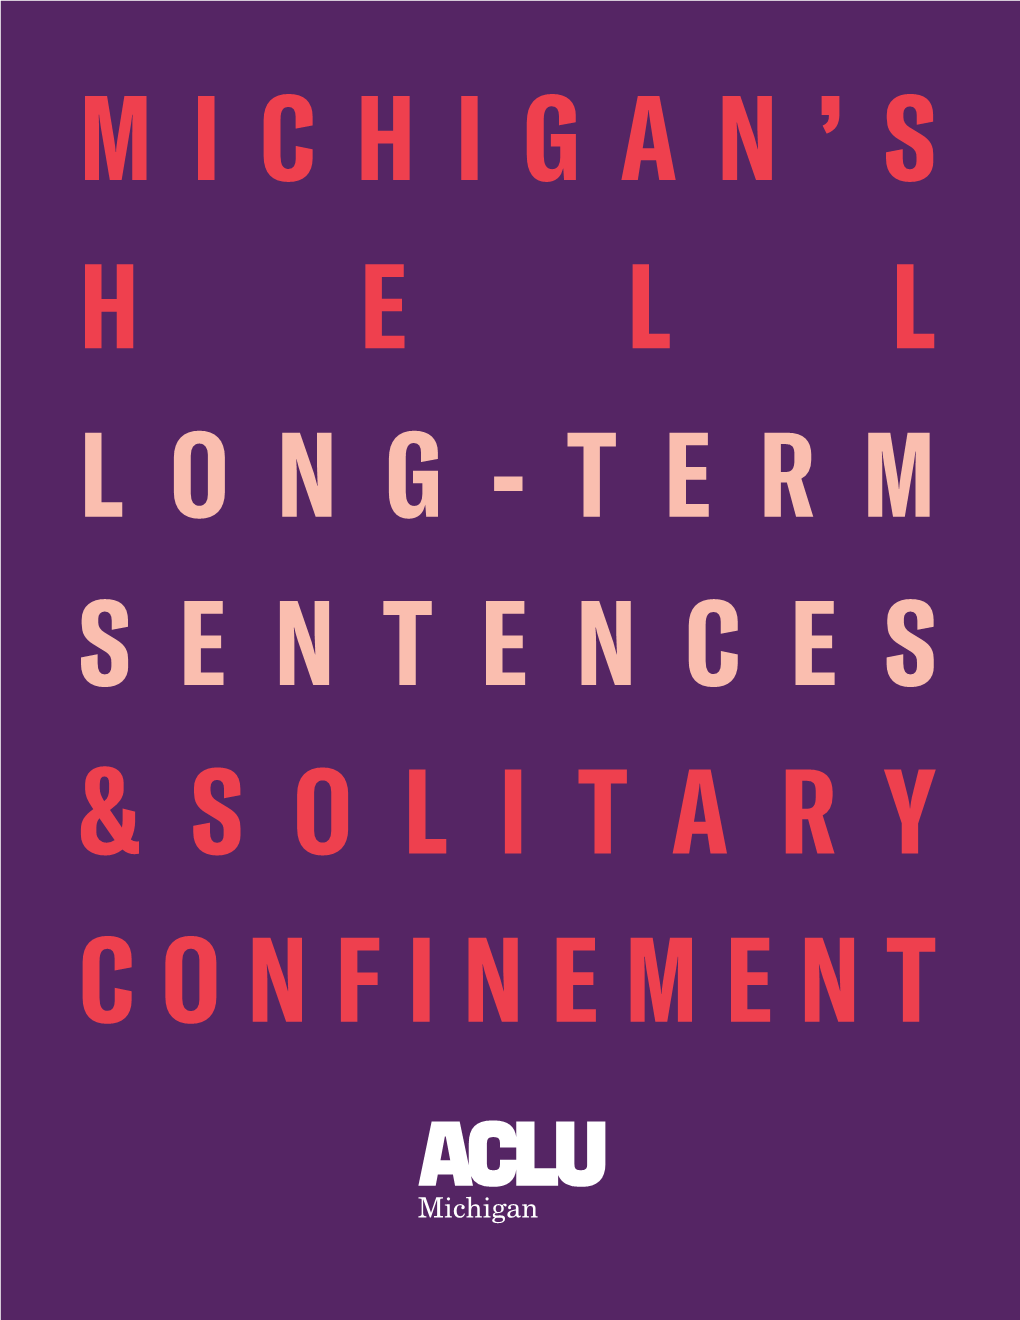 Solitary Confinement in Michigan's Prisons